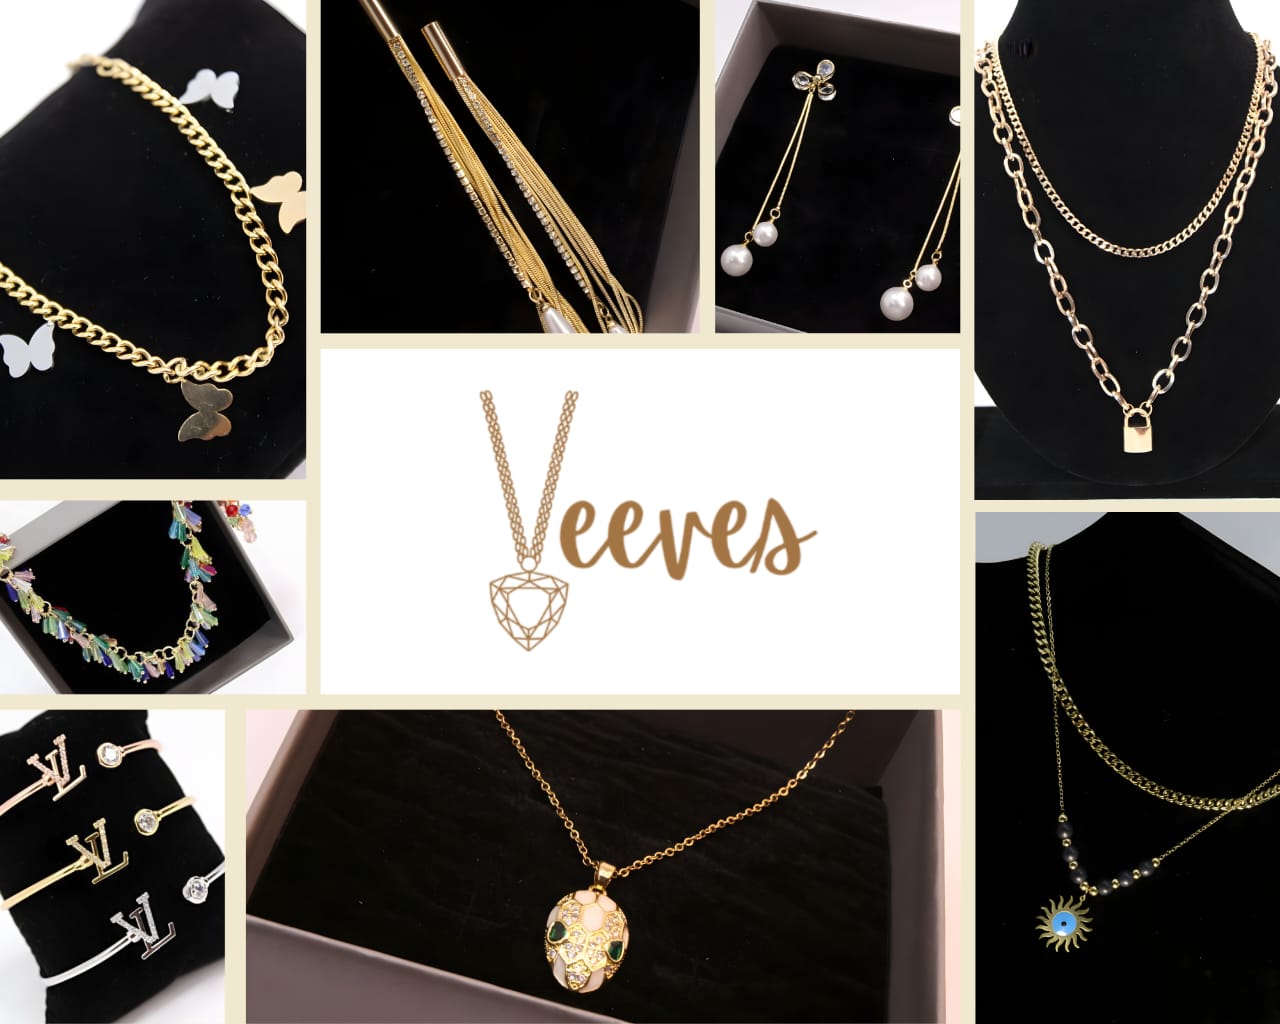 Jewelry Gift Ideas for Mother's Day by Veeves: Sparkling Tokens of Appreciation